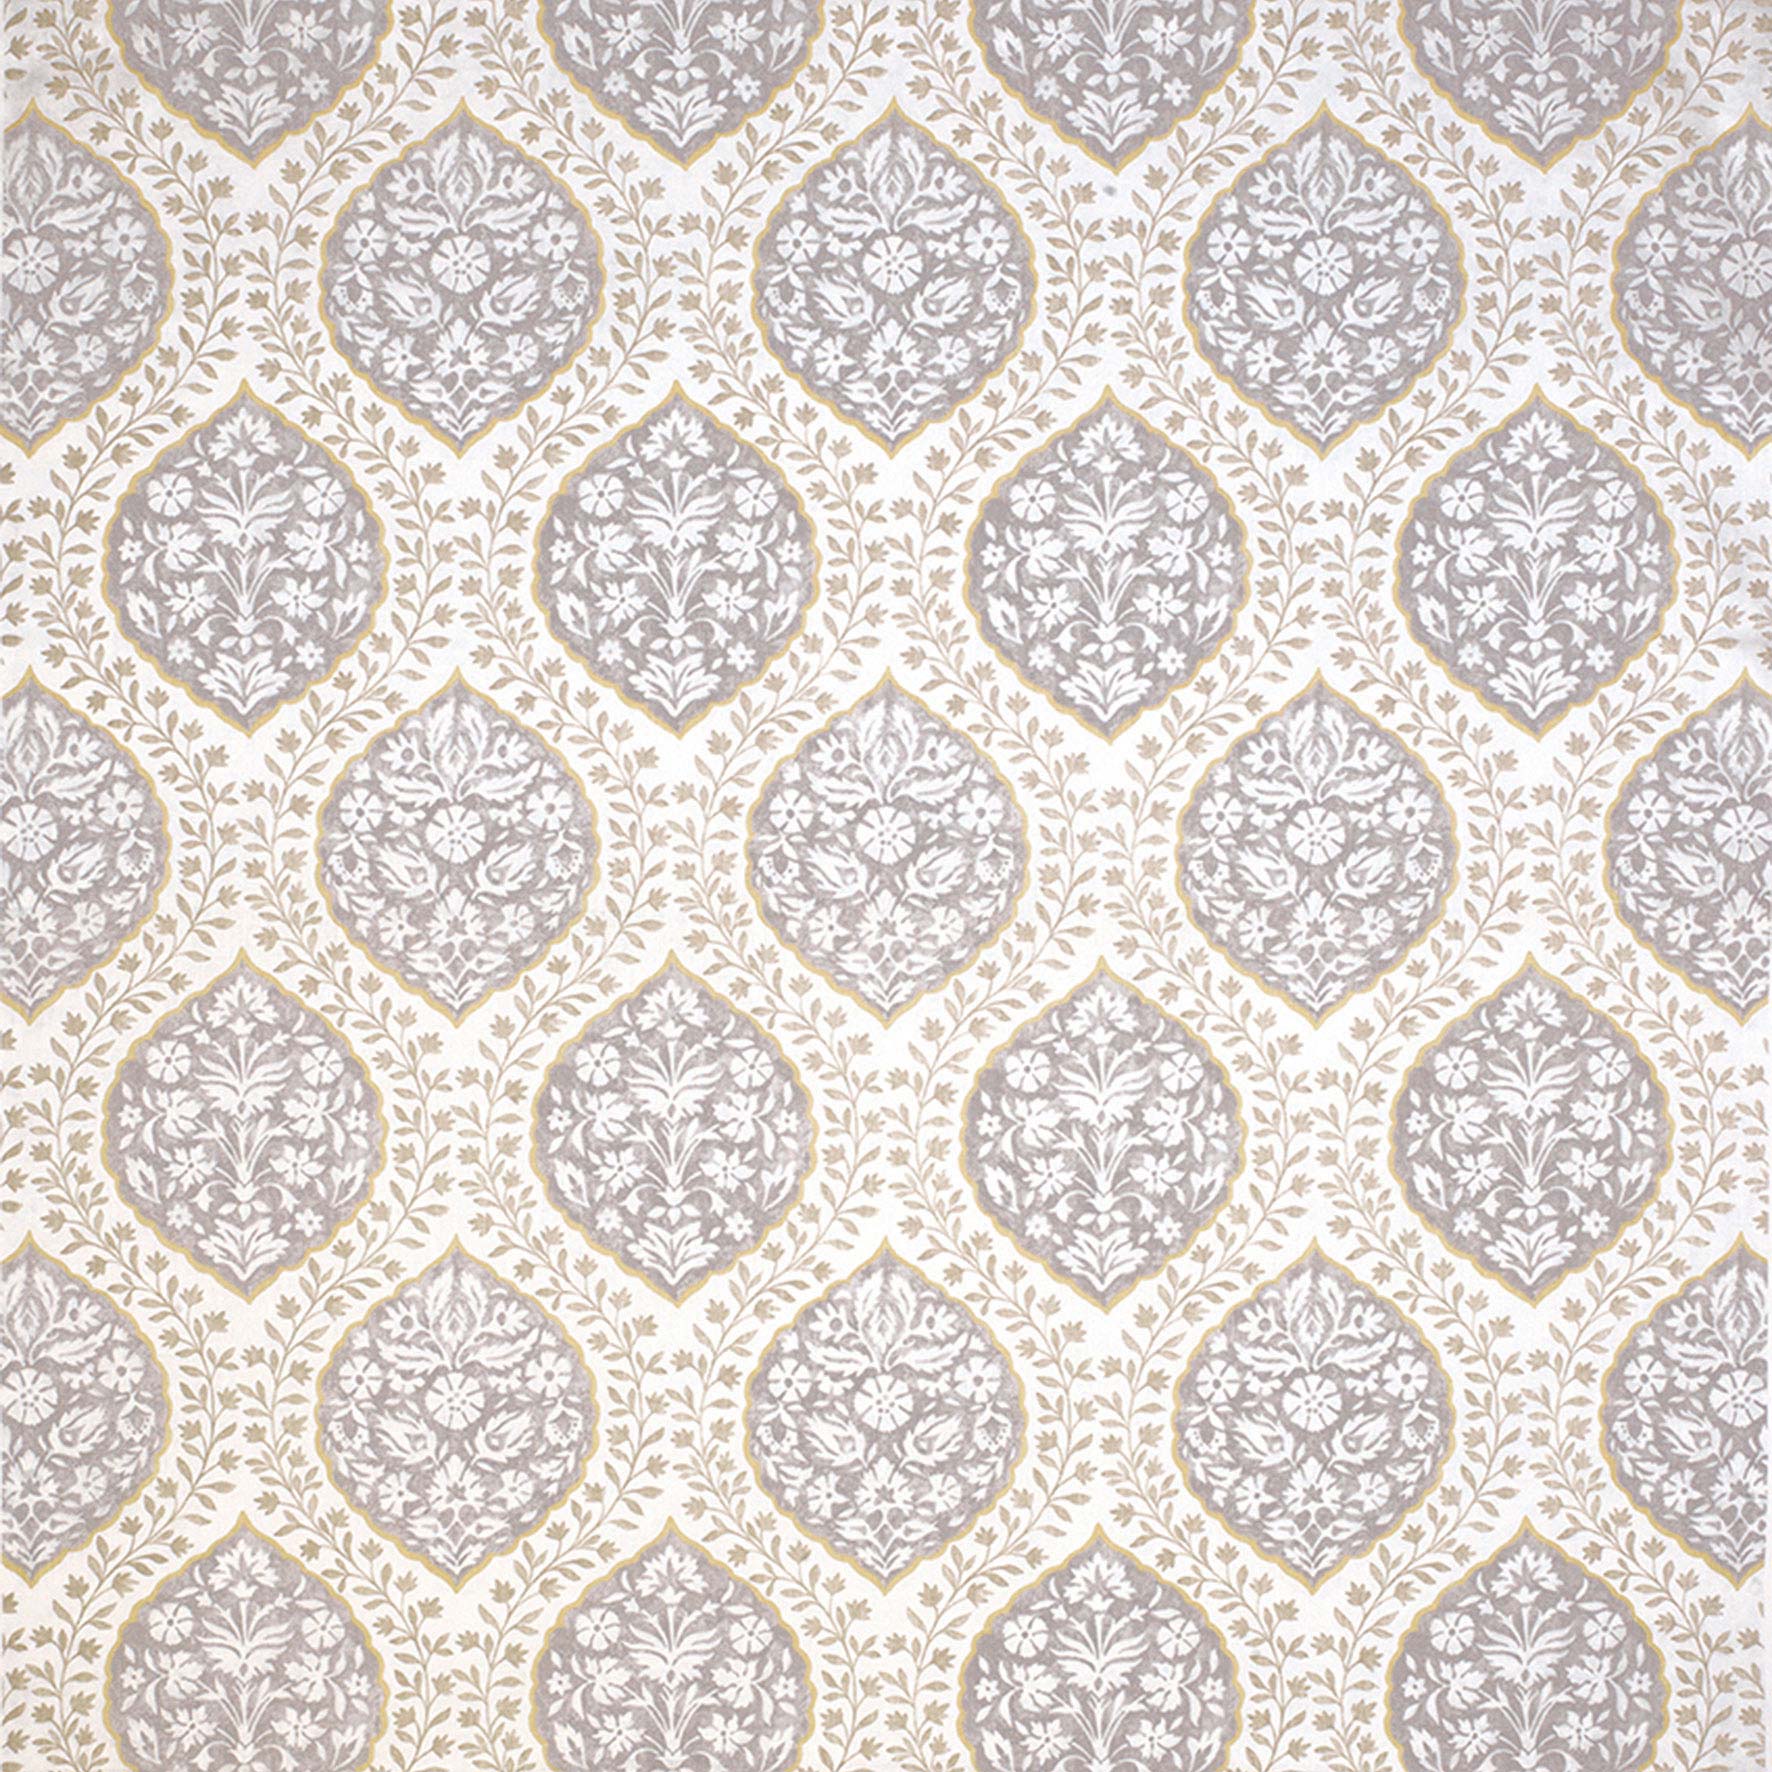 Nina Campbell Fabric - Les Rêves Marguerite Dove/Grey NCF4294-03